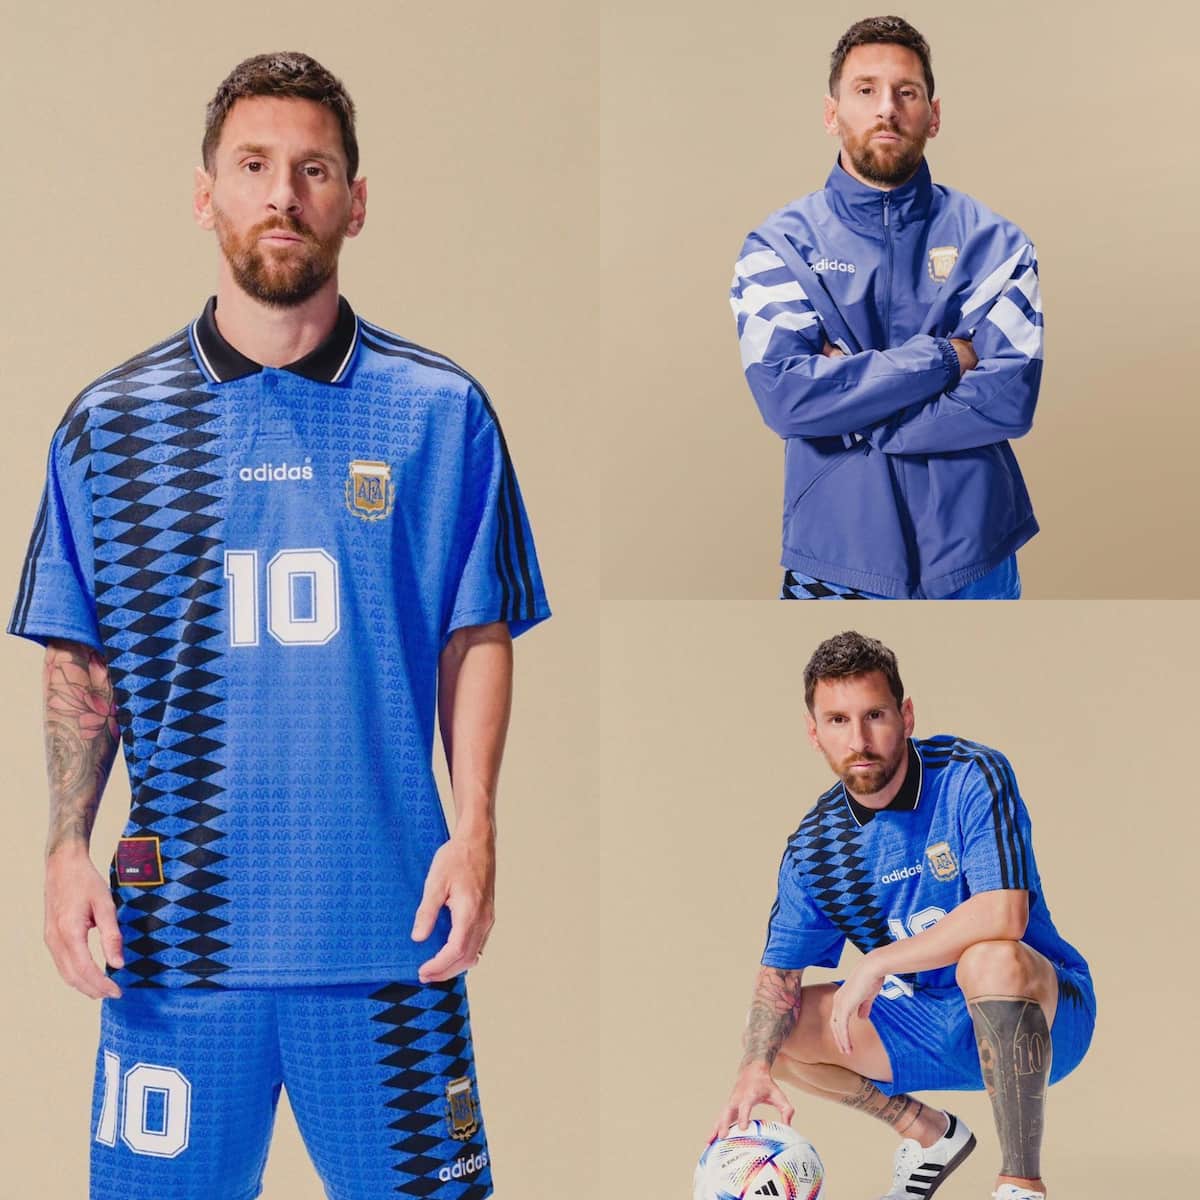 Argentina 1994 world cup jersey